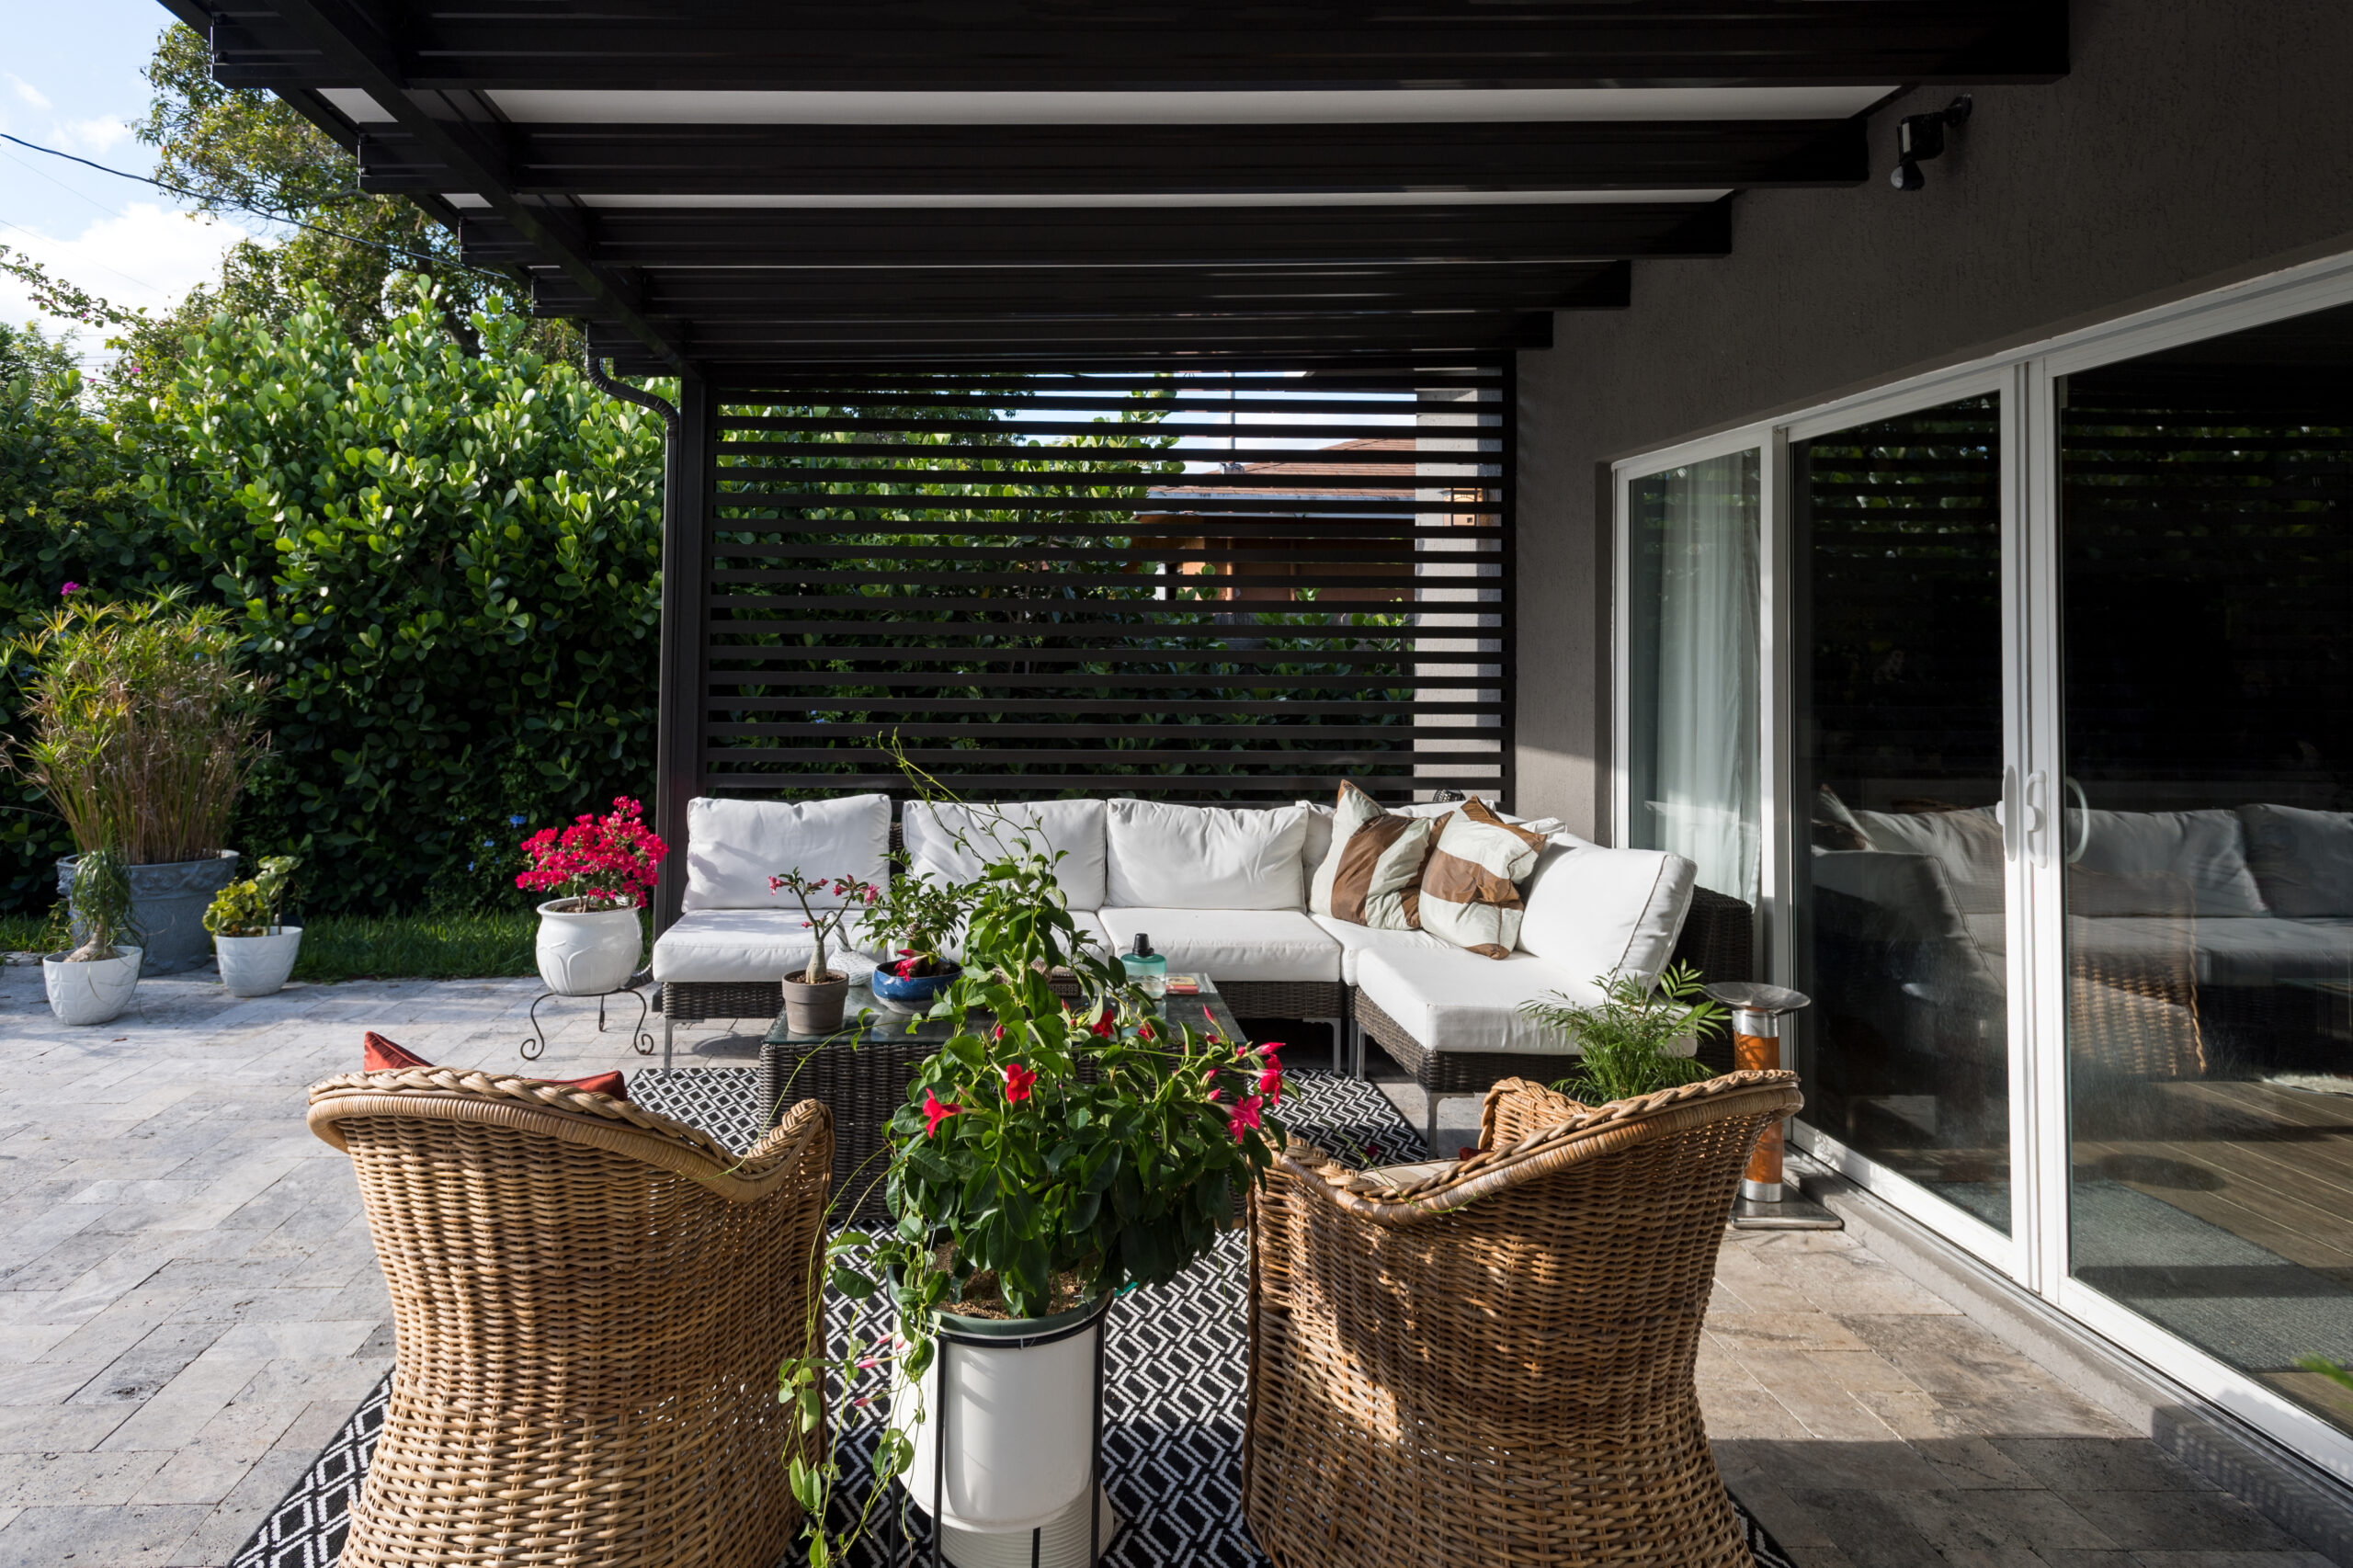 Furnishing your new patio